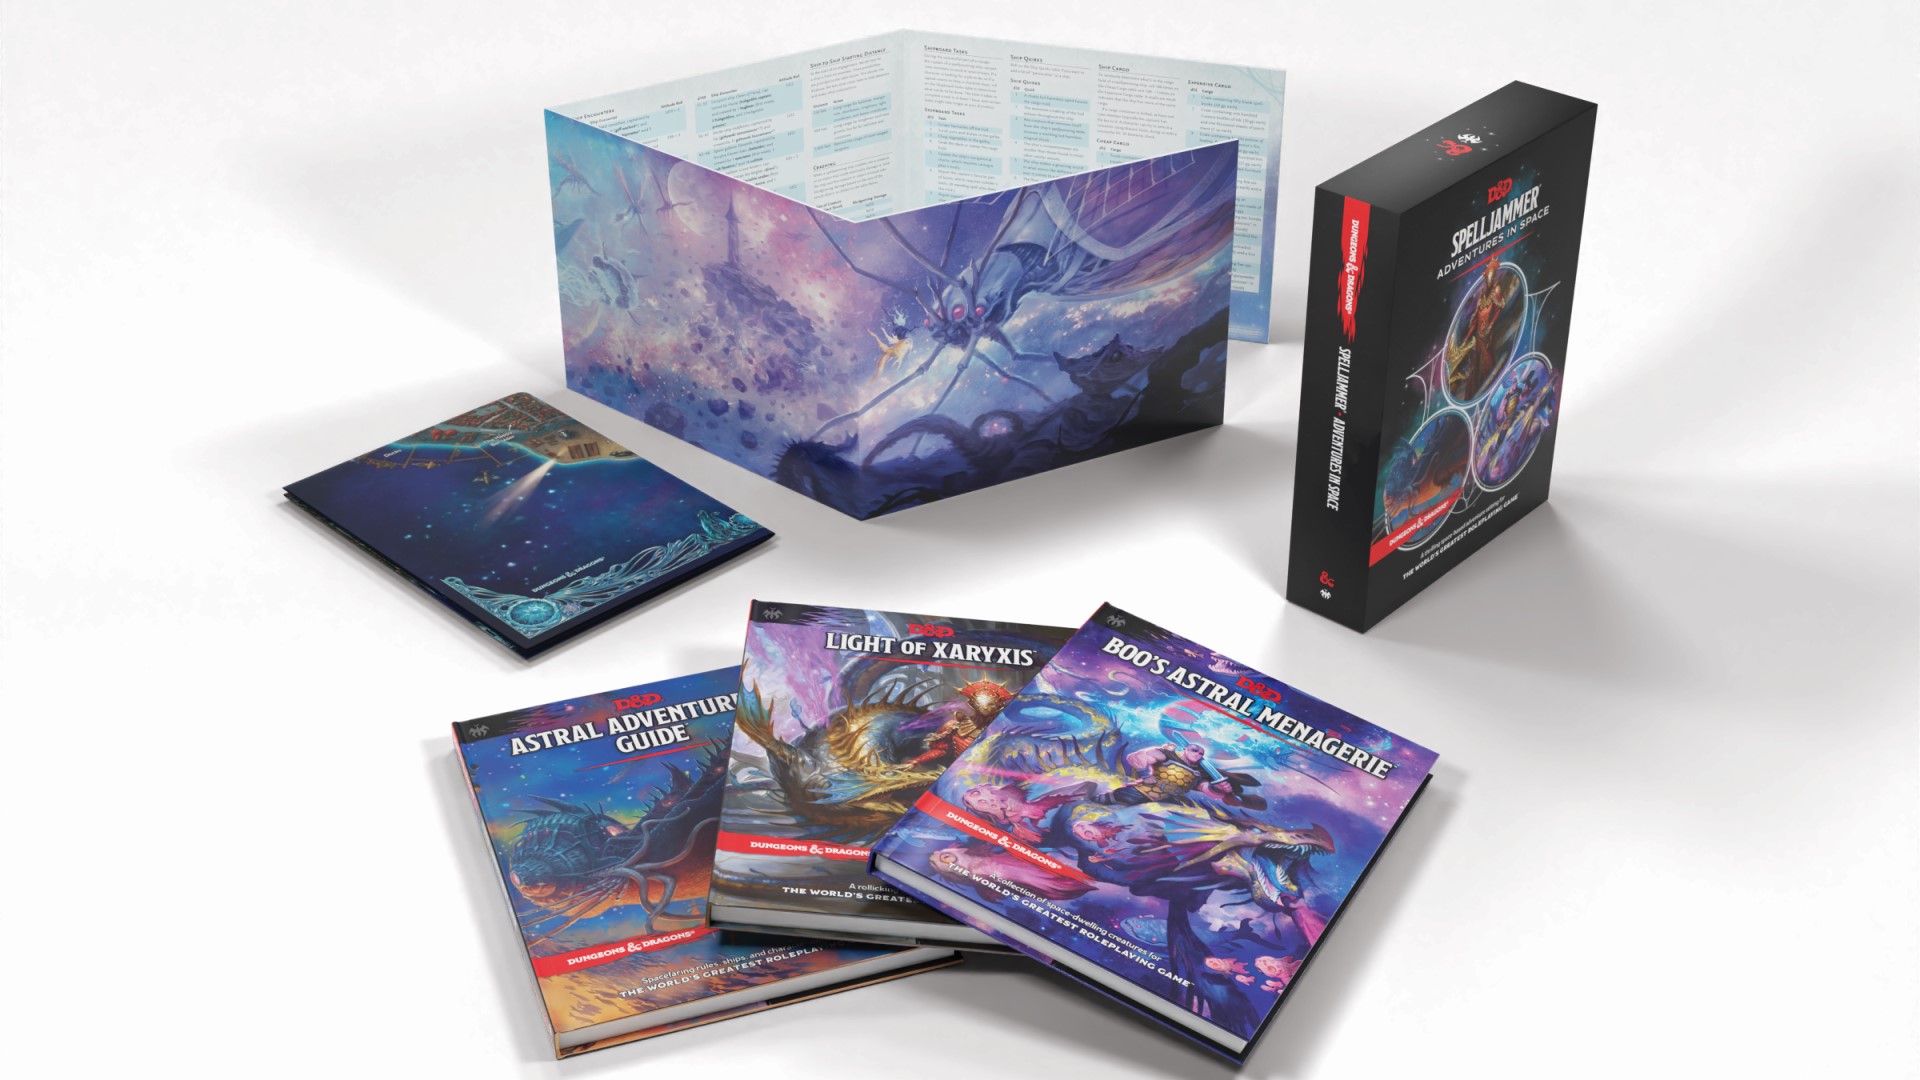 DnD Spelljammer Adventures in Space book set product photo from Wizards of the Coast